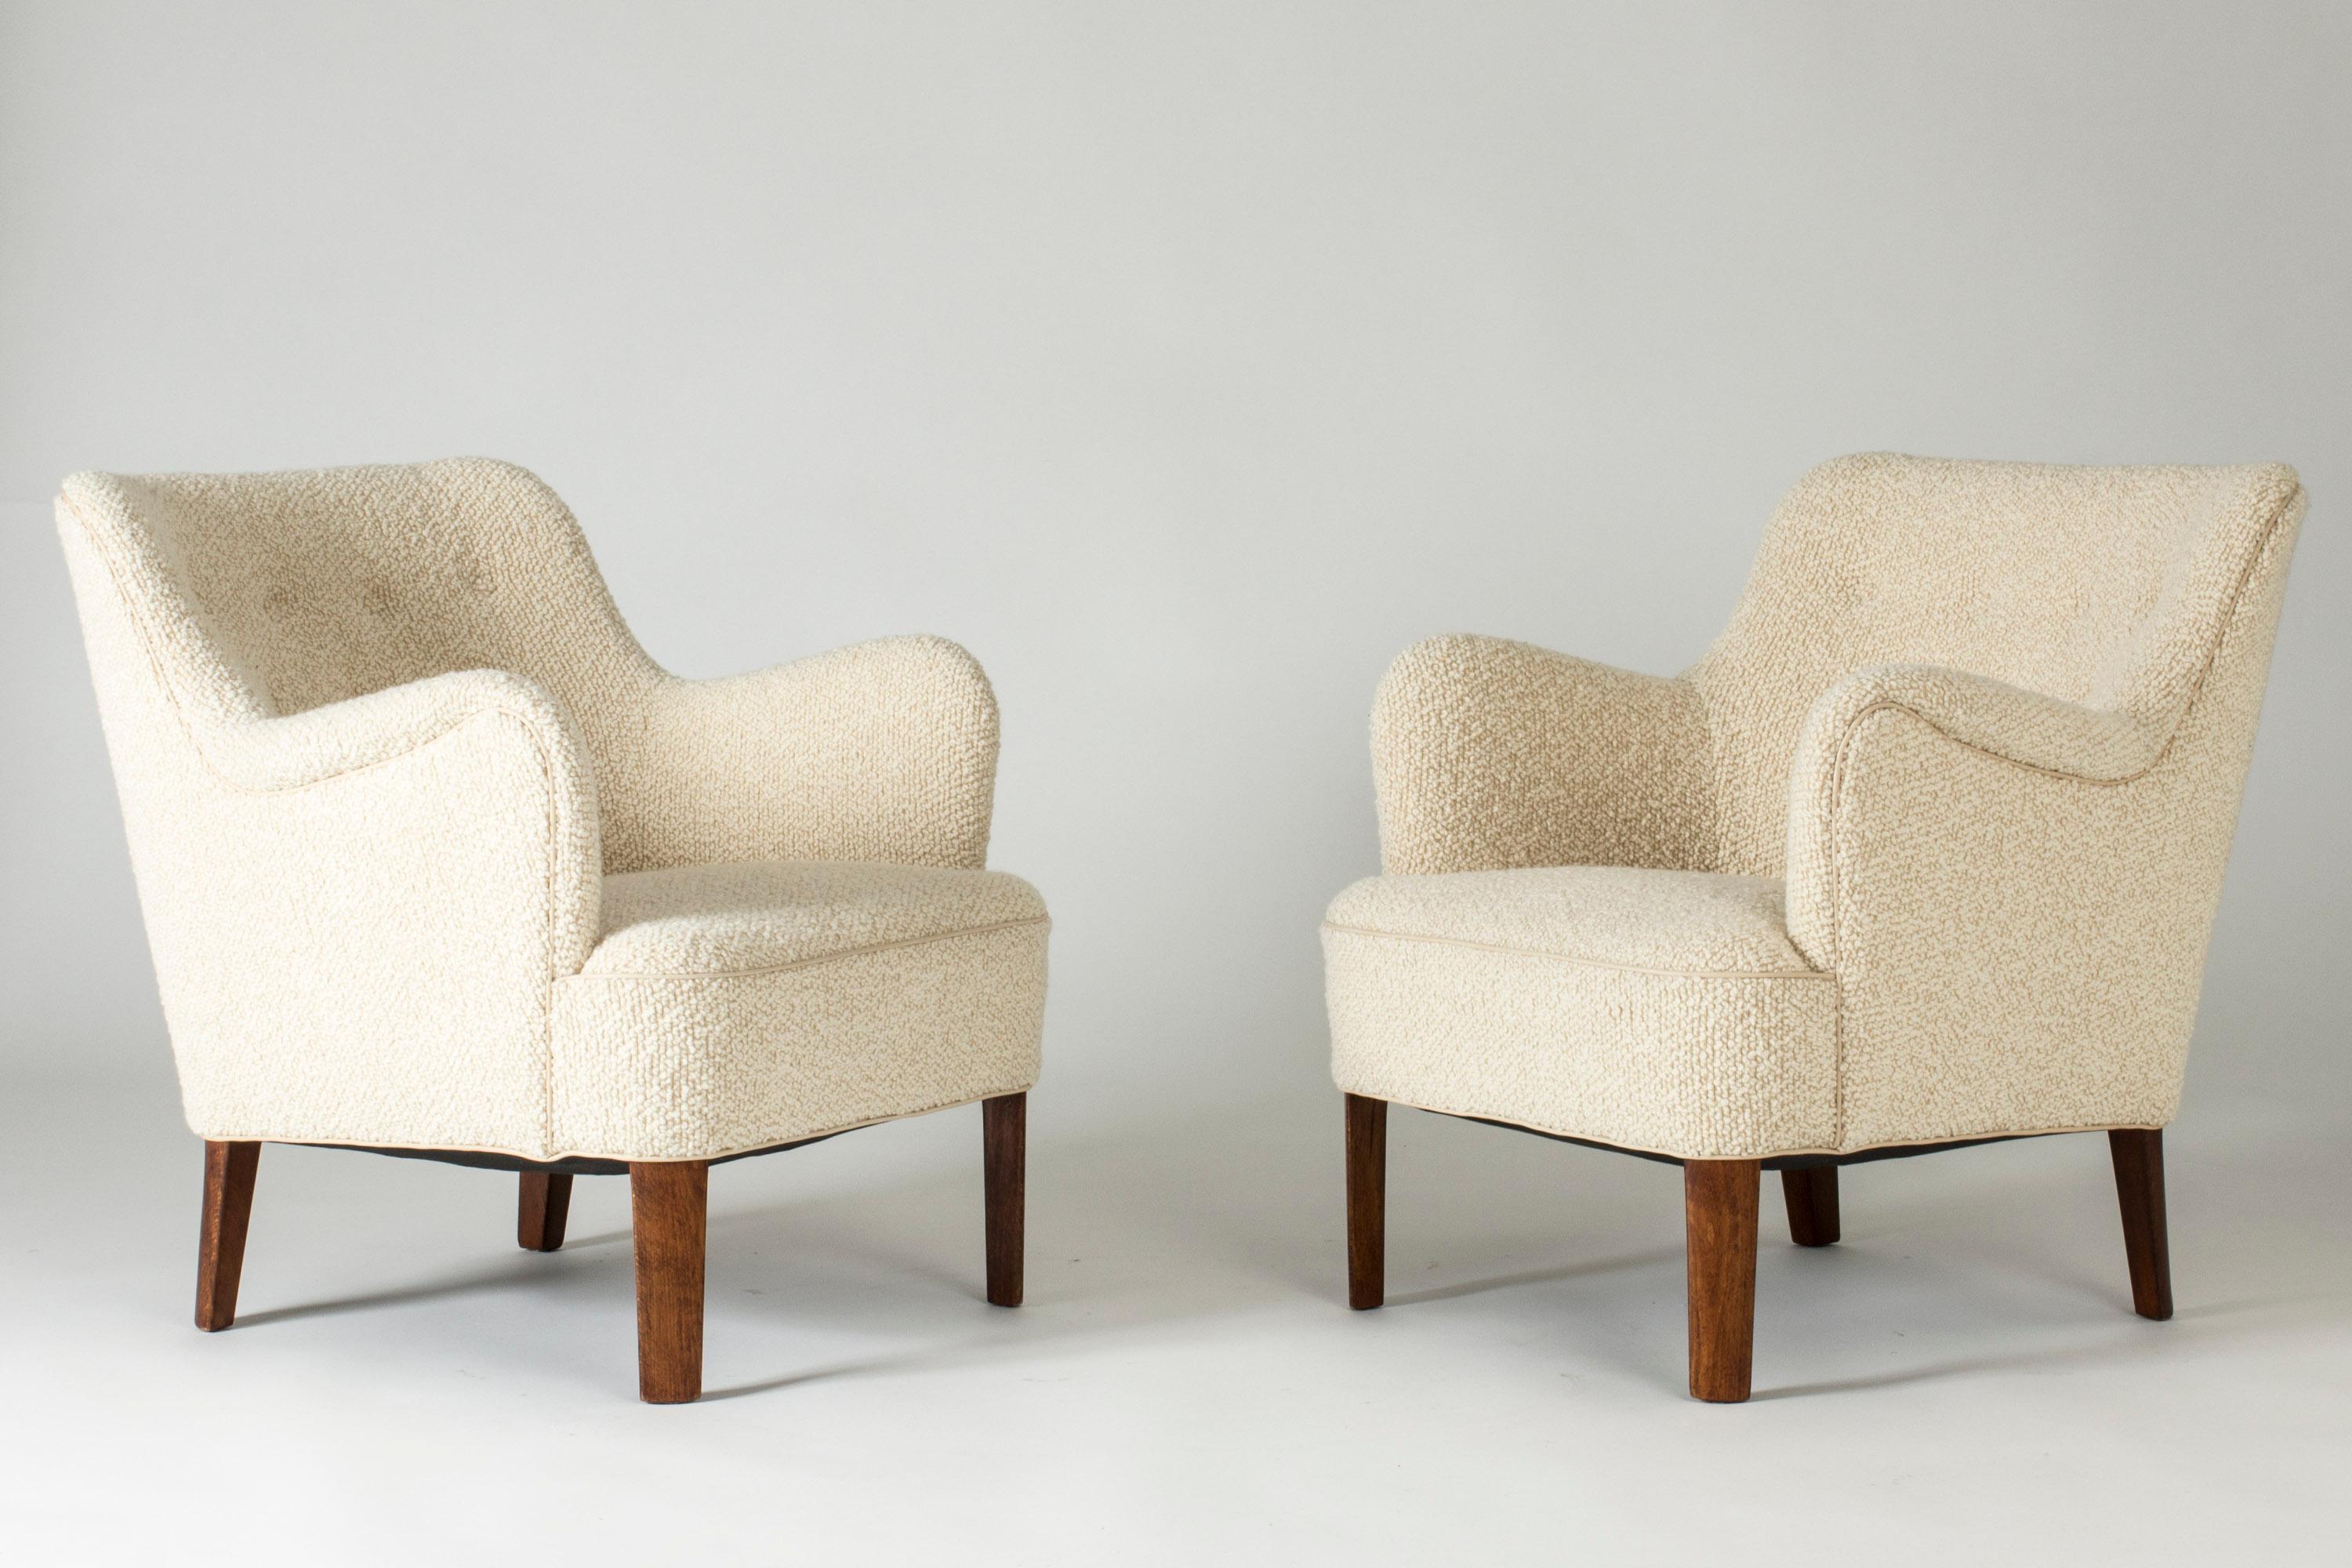 Pair of elegant lounge chairs by Peter Hvidt, in a neat size and with curved forms. Upholstered with quality bouclé fabric, white leather piping. Seat height 39 cm.